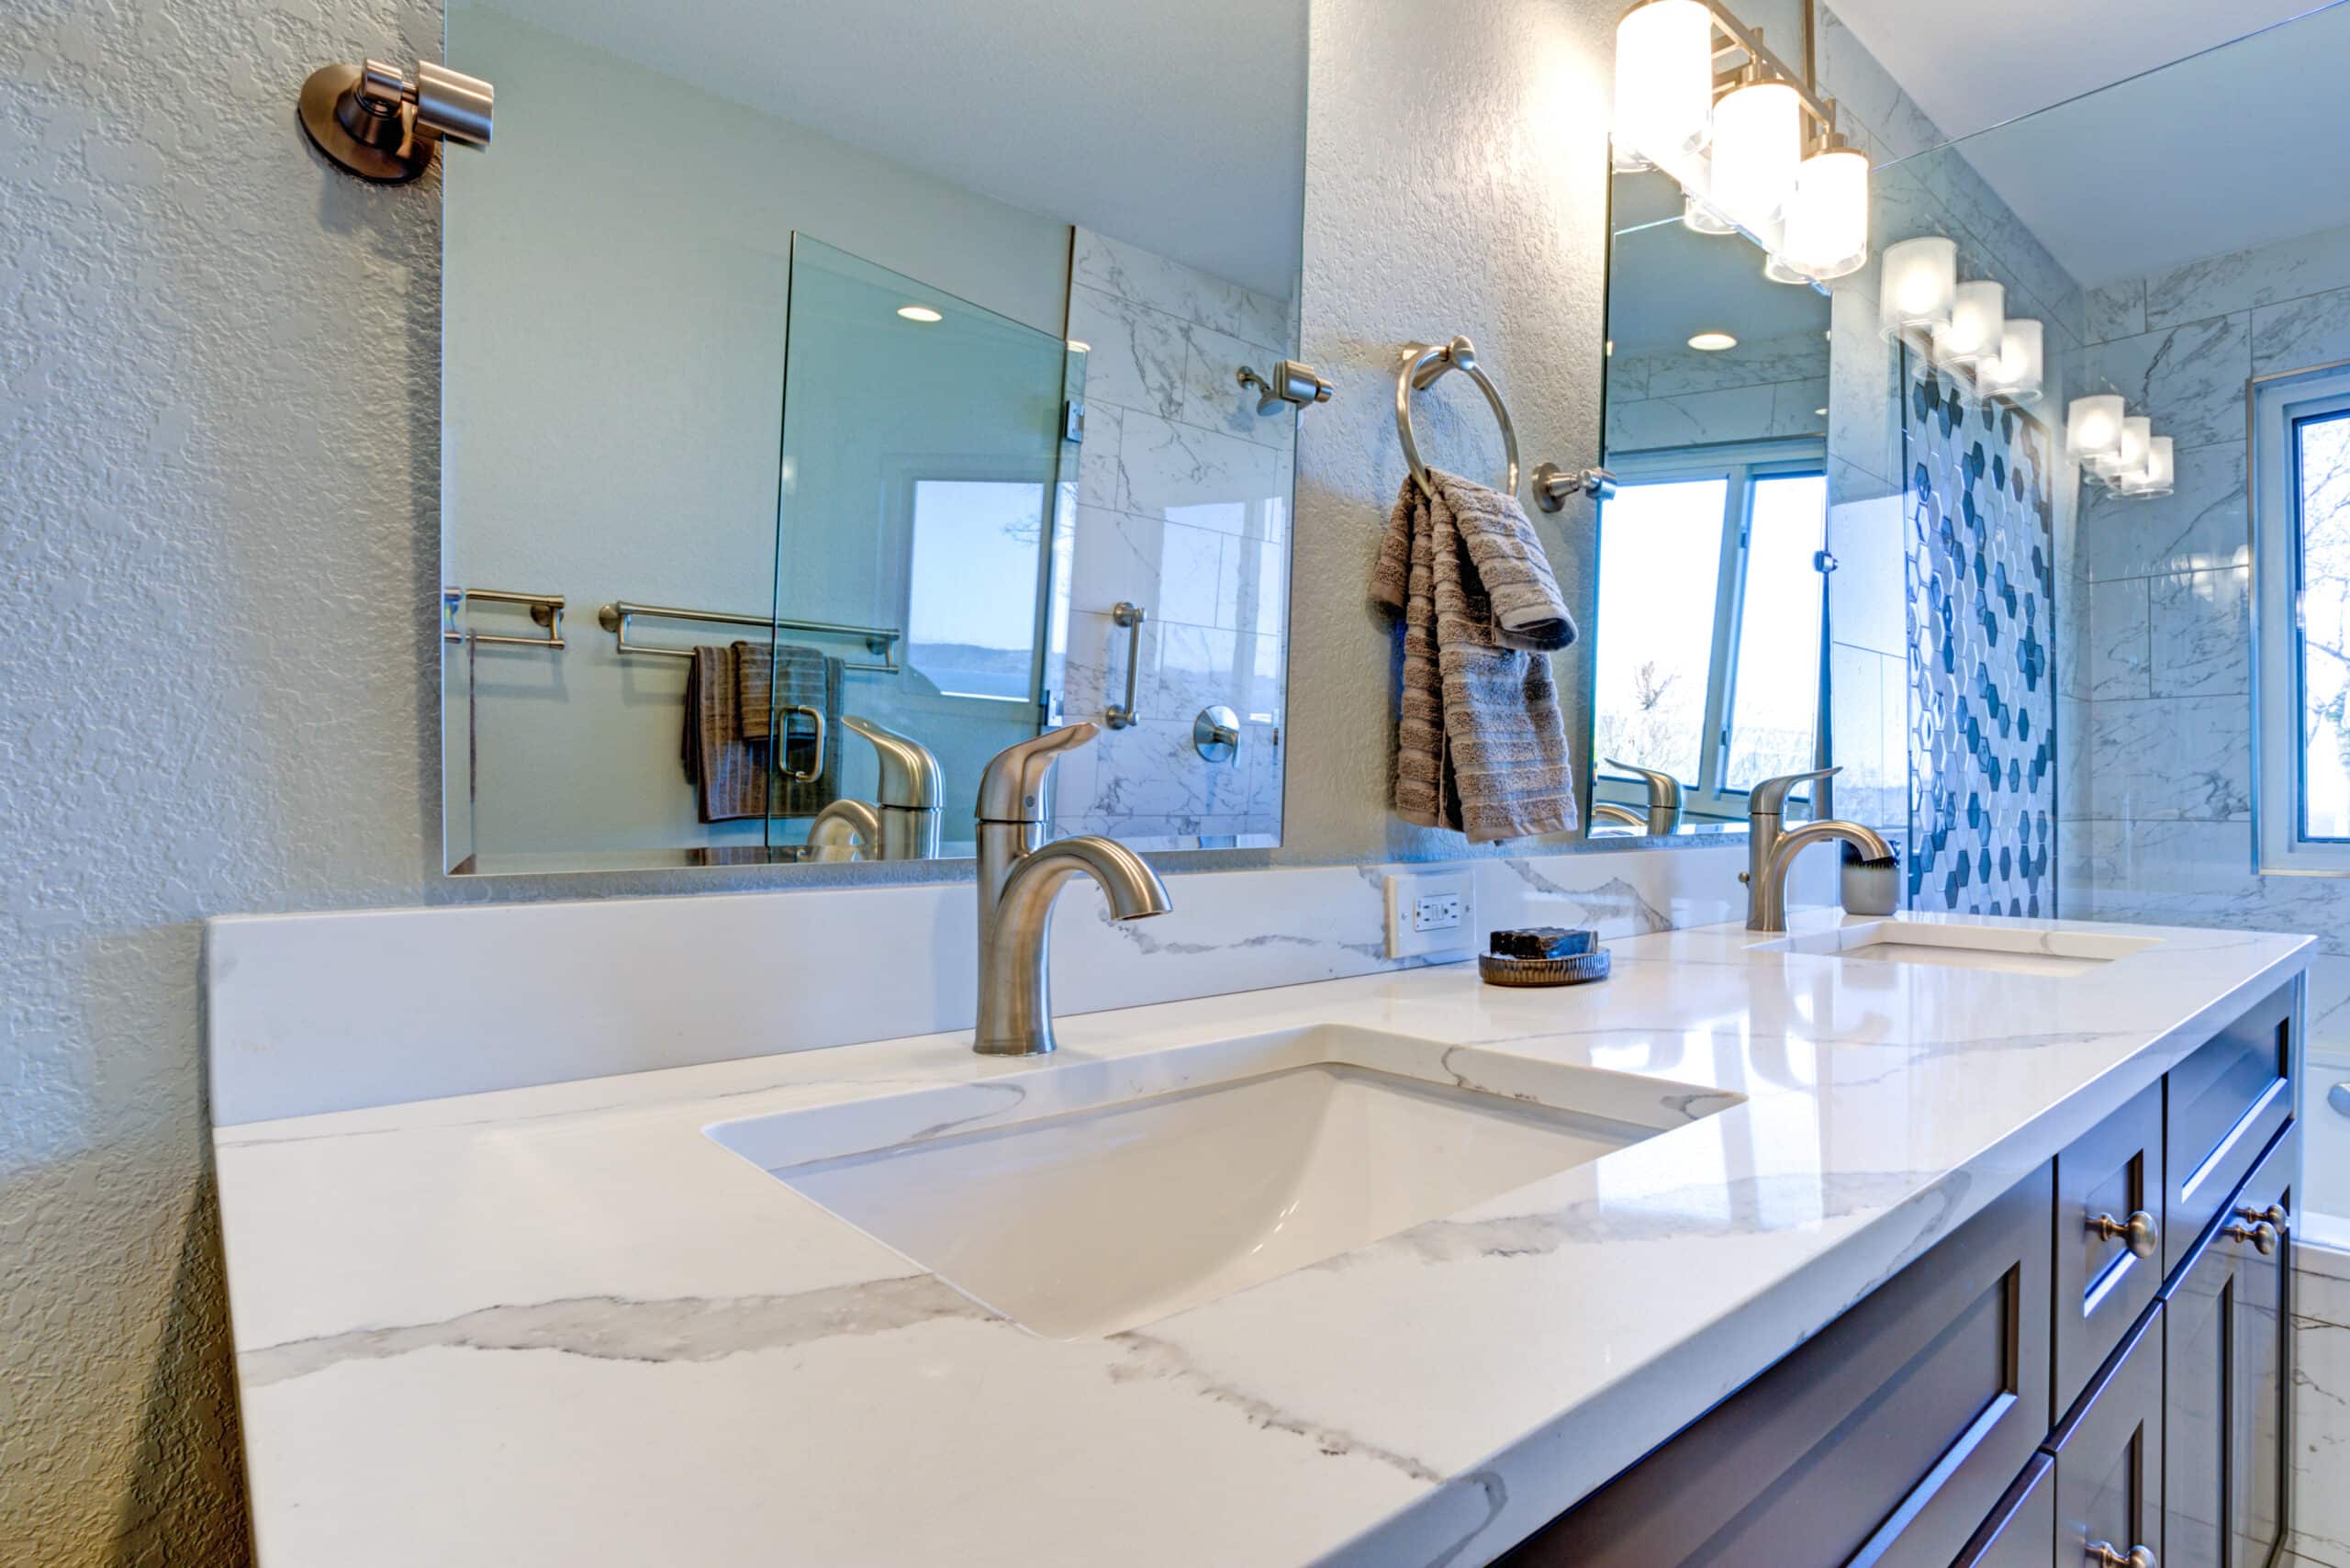 Luxury bathroom interior with blue dual washstand and marble counter top.